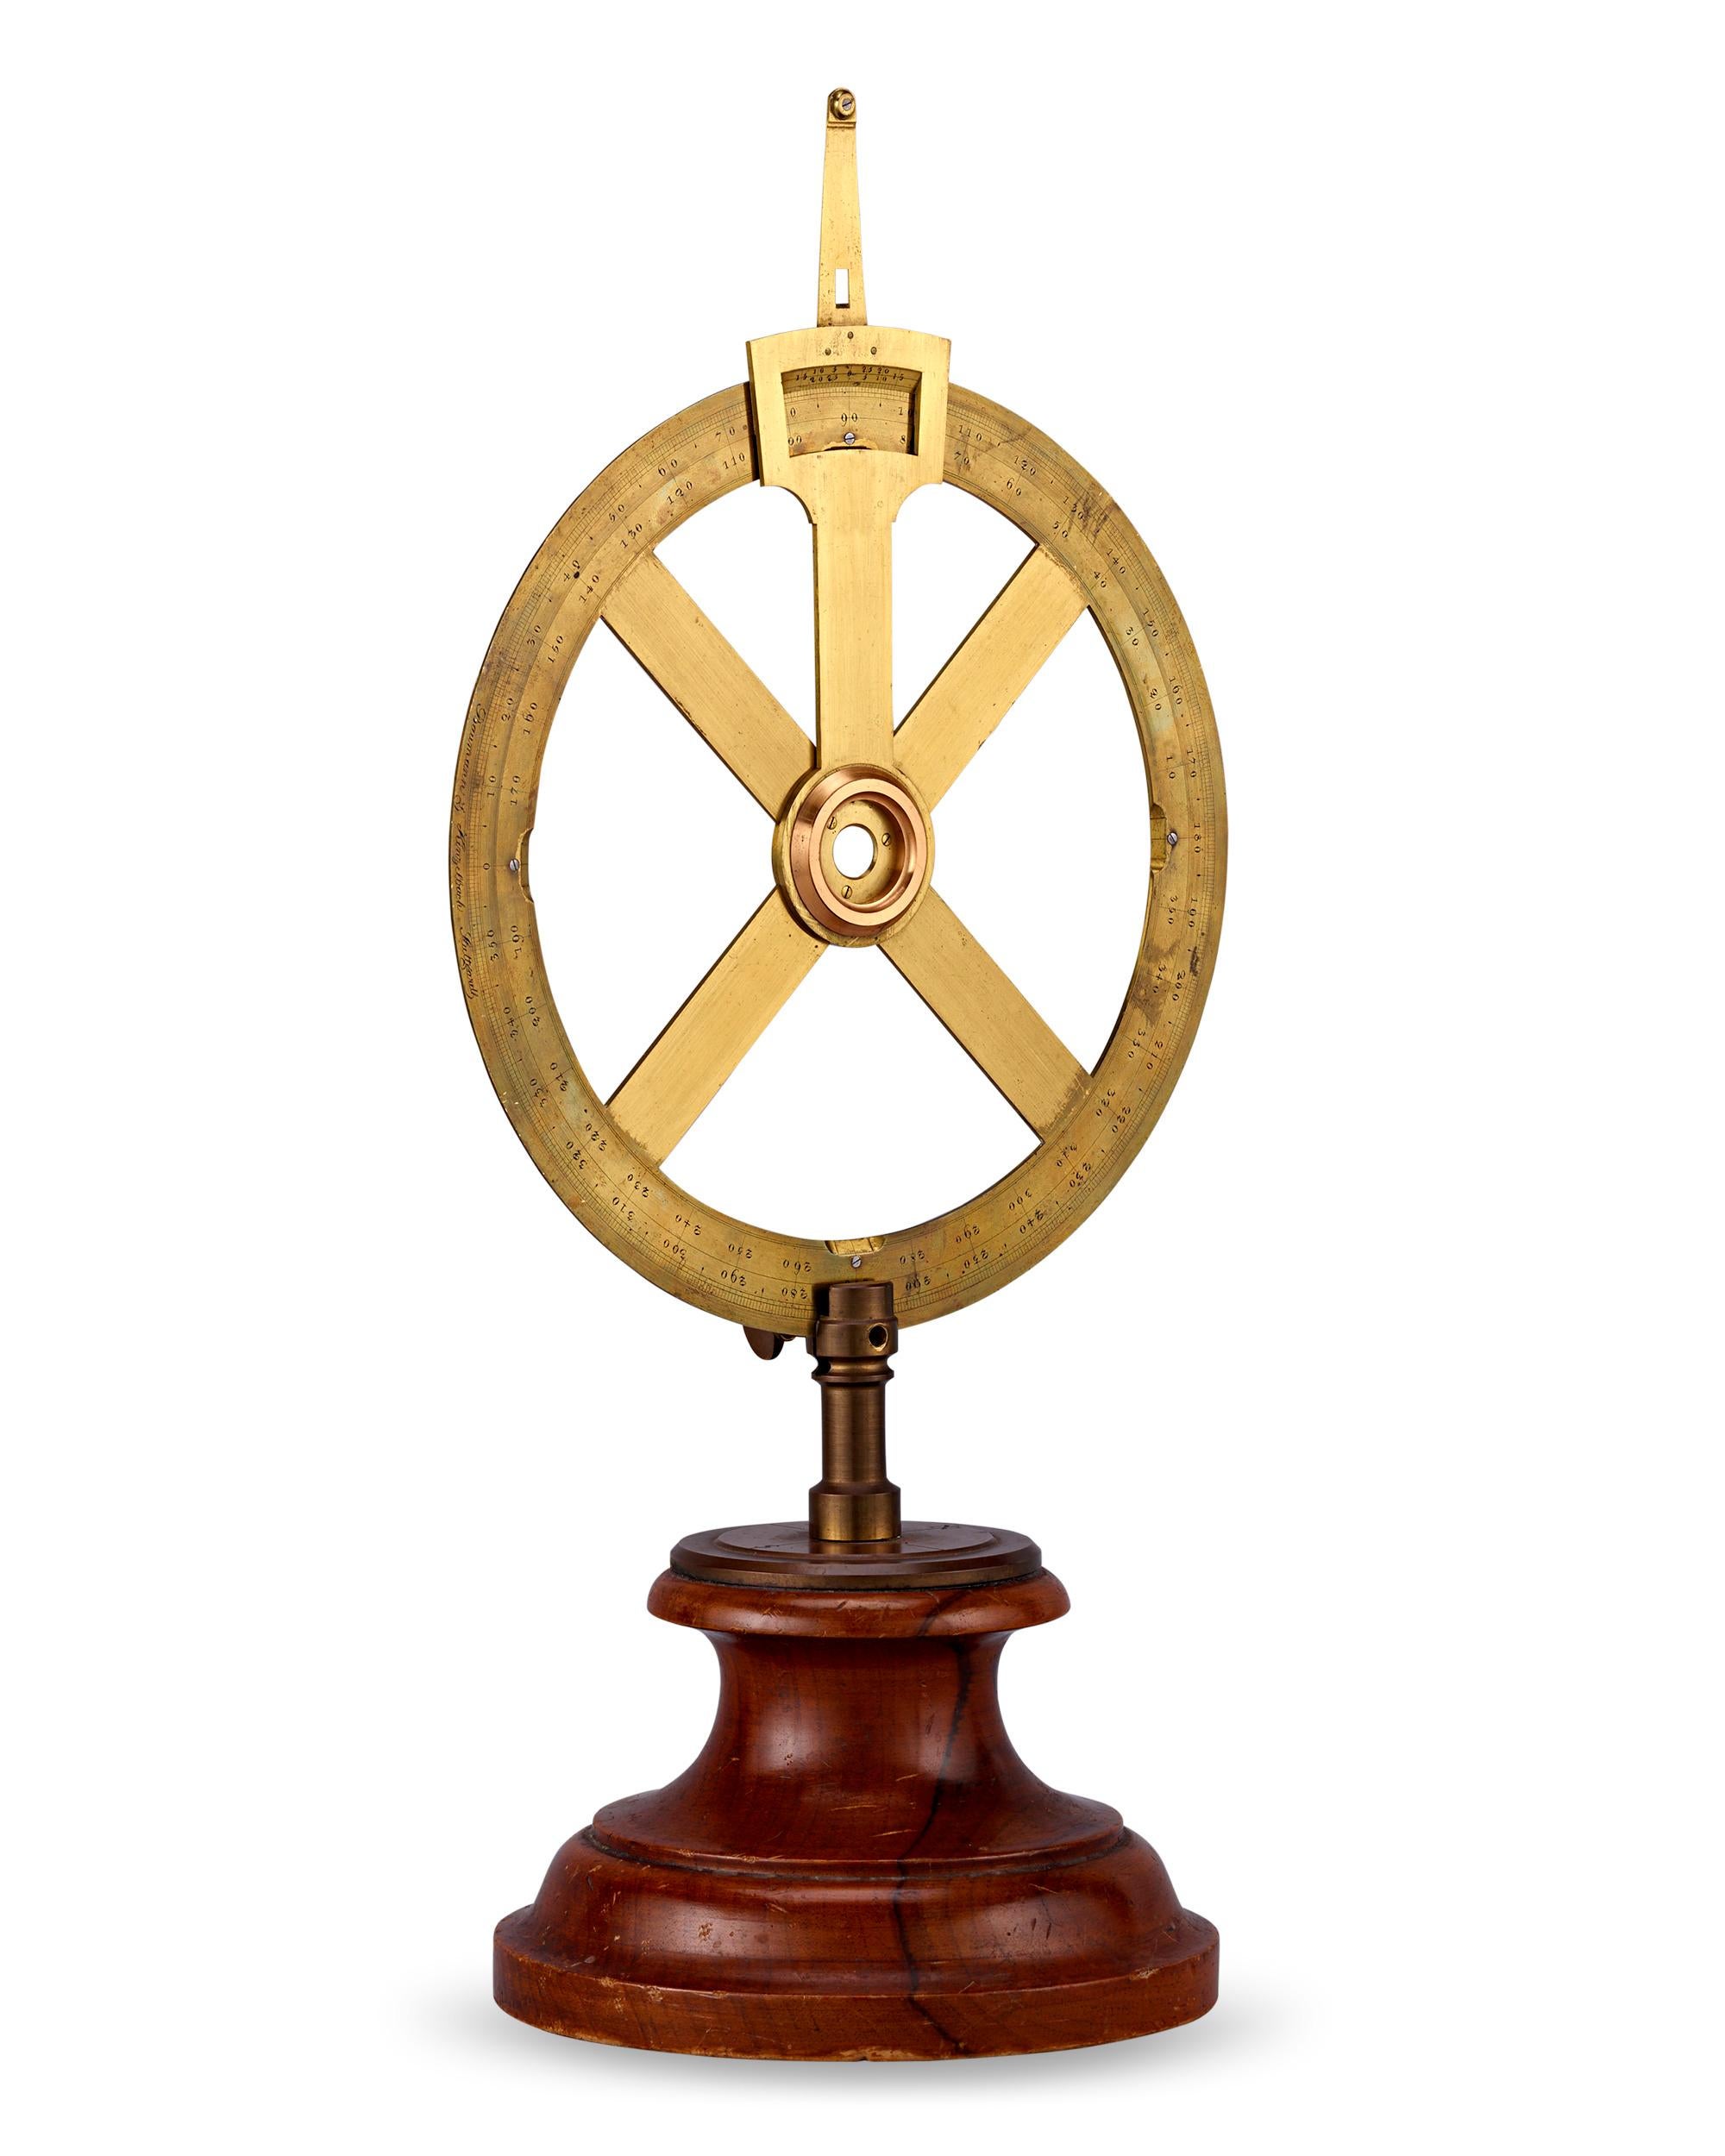 This intriguing item is almost certainly a Holland Circle by German scientific instrument makers Baumann & Kinzelbach. The Holland Circle, sometimes referred to as a Dutch Circle, was used in land surveying and is a precursor to the theodolite, an